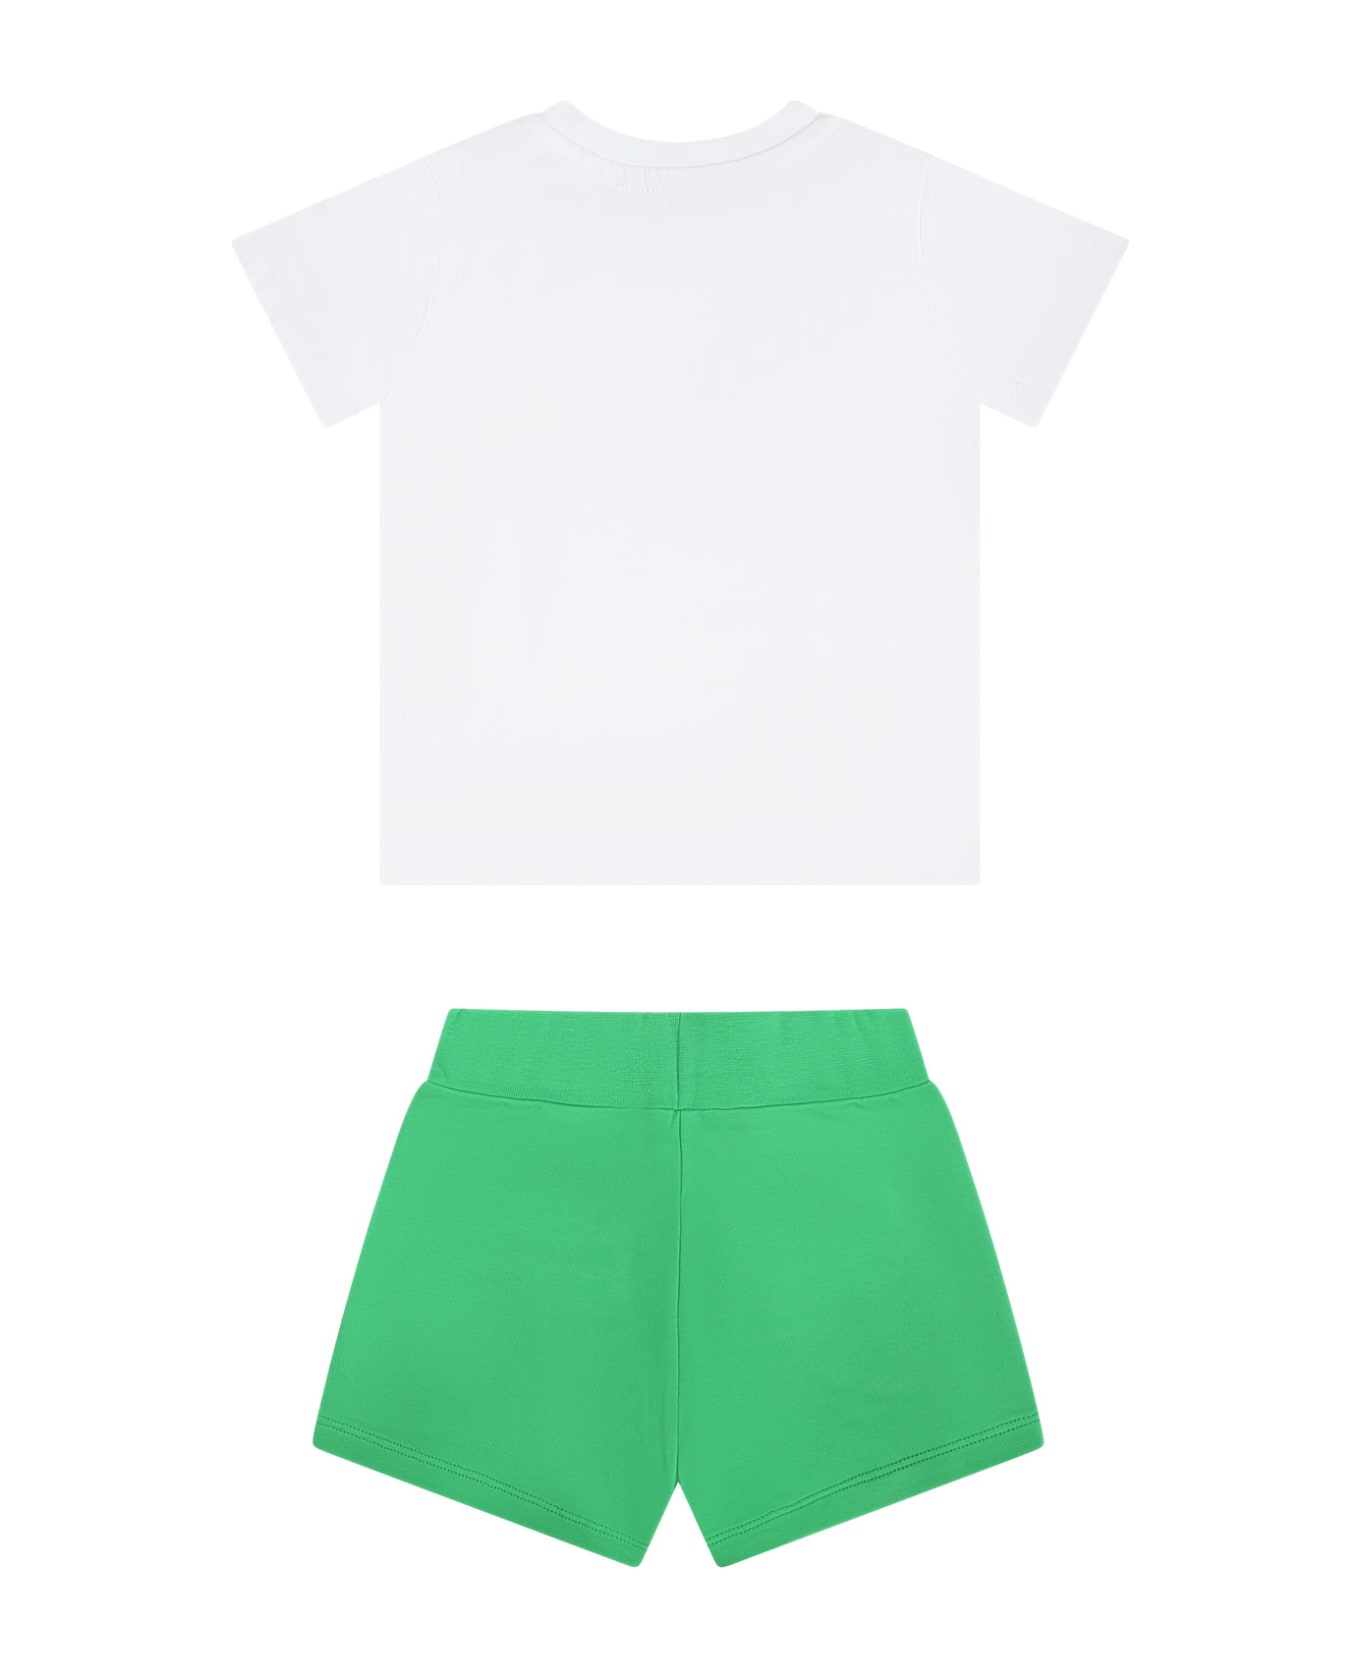 MSGM Green Set For Babykids With Logo - Green ボトムス